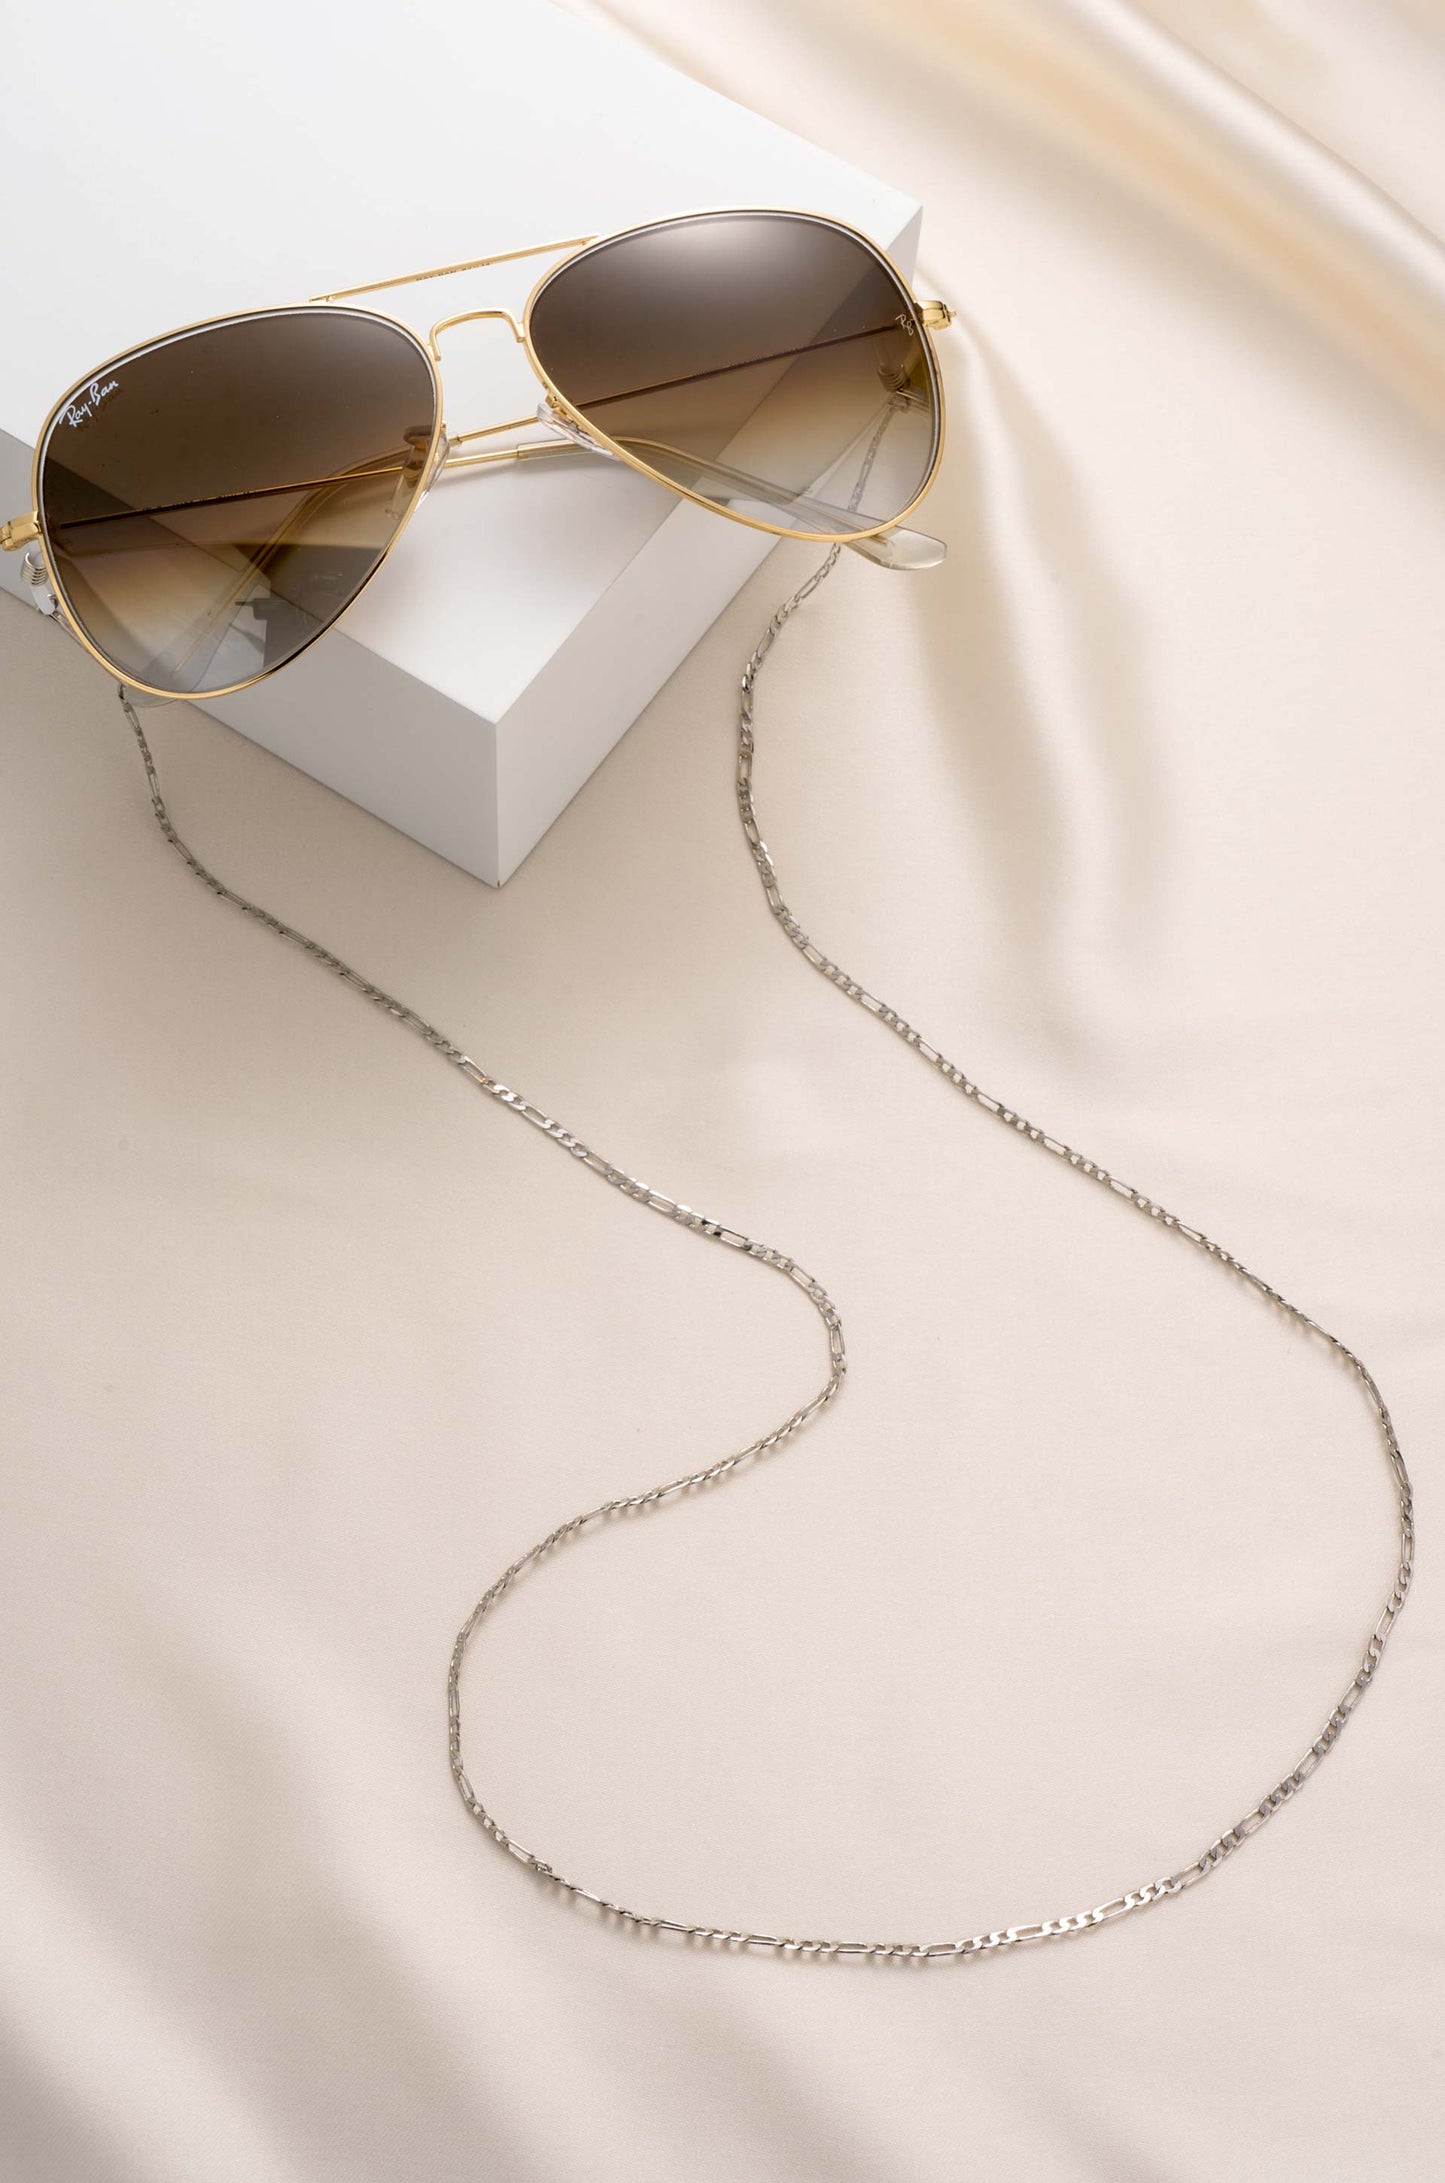 Everyday Glasses Chain in gold in rhodium